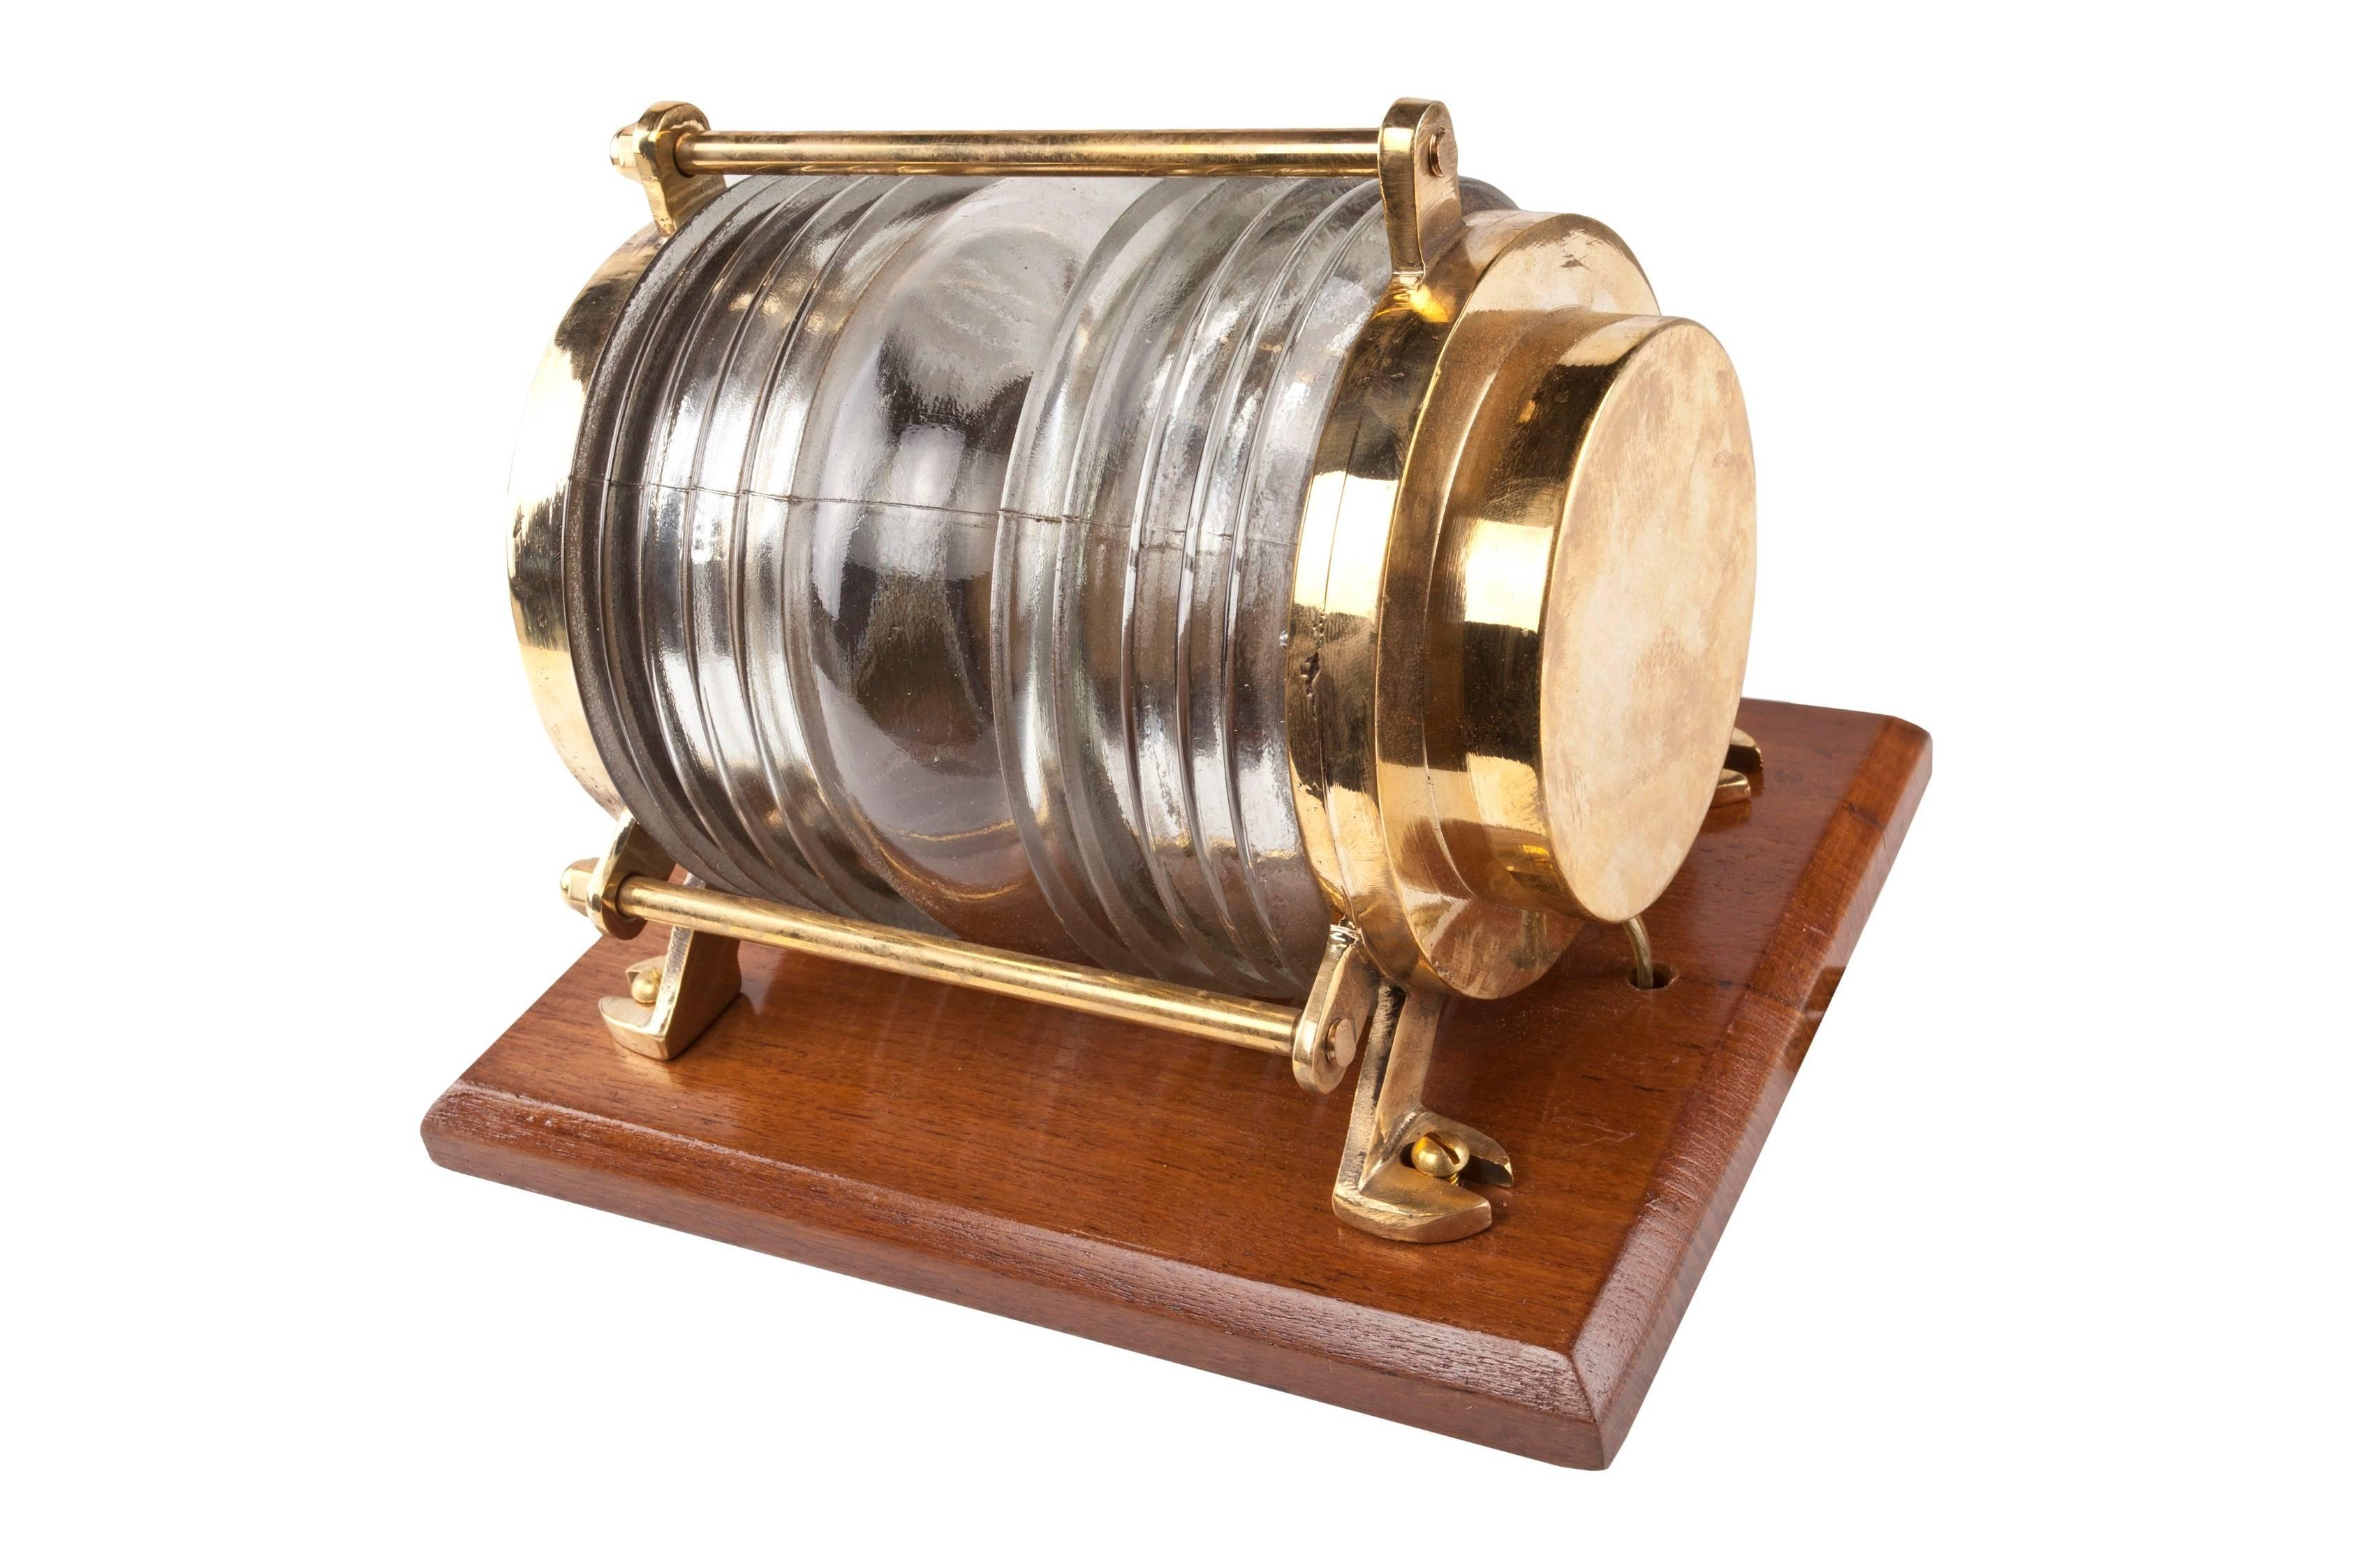 Pair of original ship's brass post lights with Fresnel lens glass mounted on a beveled teak backplate for easier installation. The top round brass plate unscrews for access to the bulb, which is a regular size base and these have been rewired for